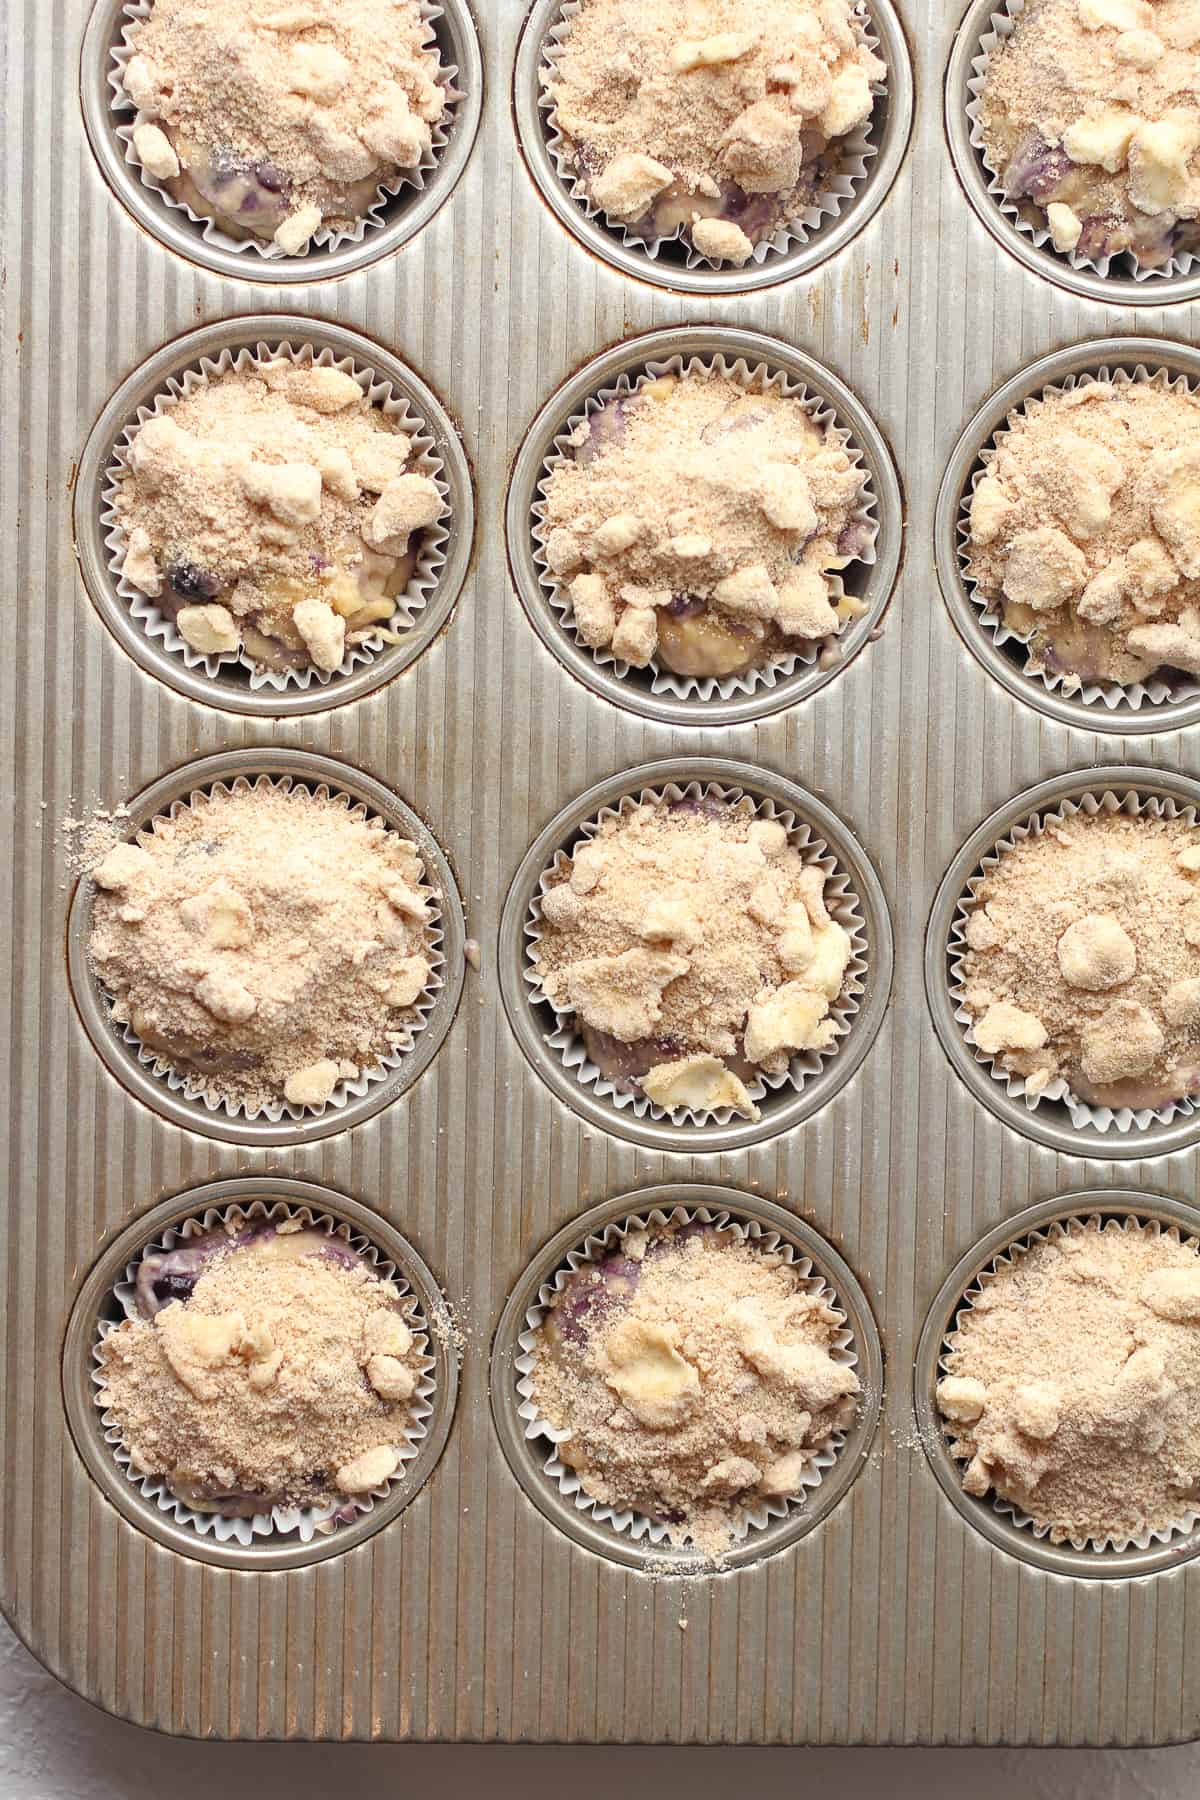 A muffin tin with the muffin dough and streusel topping ready to bake.